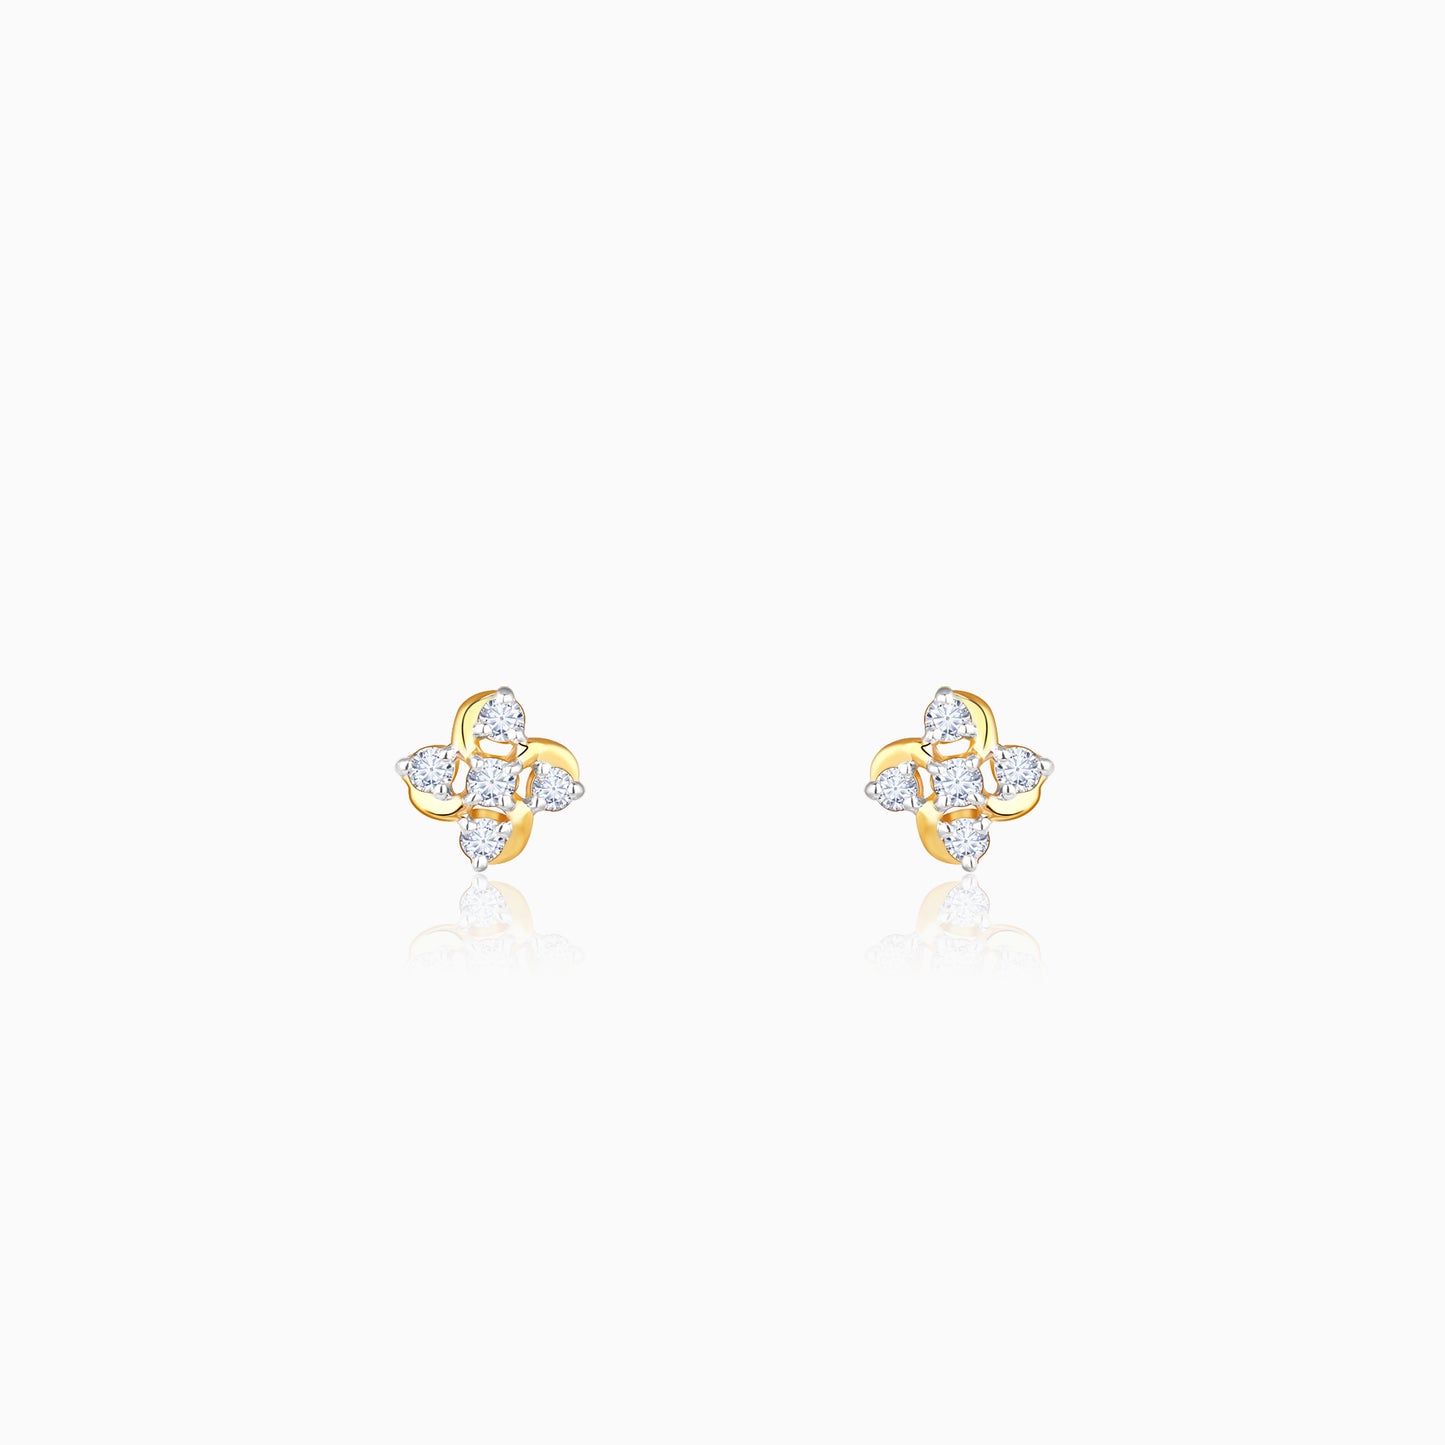 Gold Floral Affection Diamond Earrings